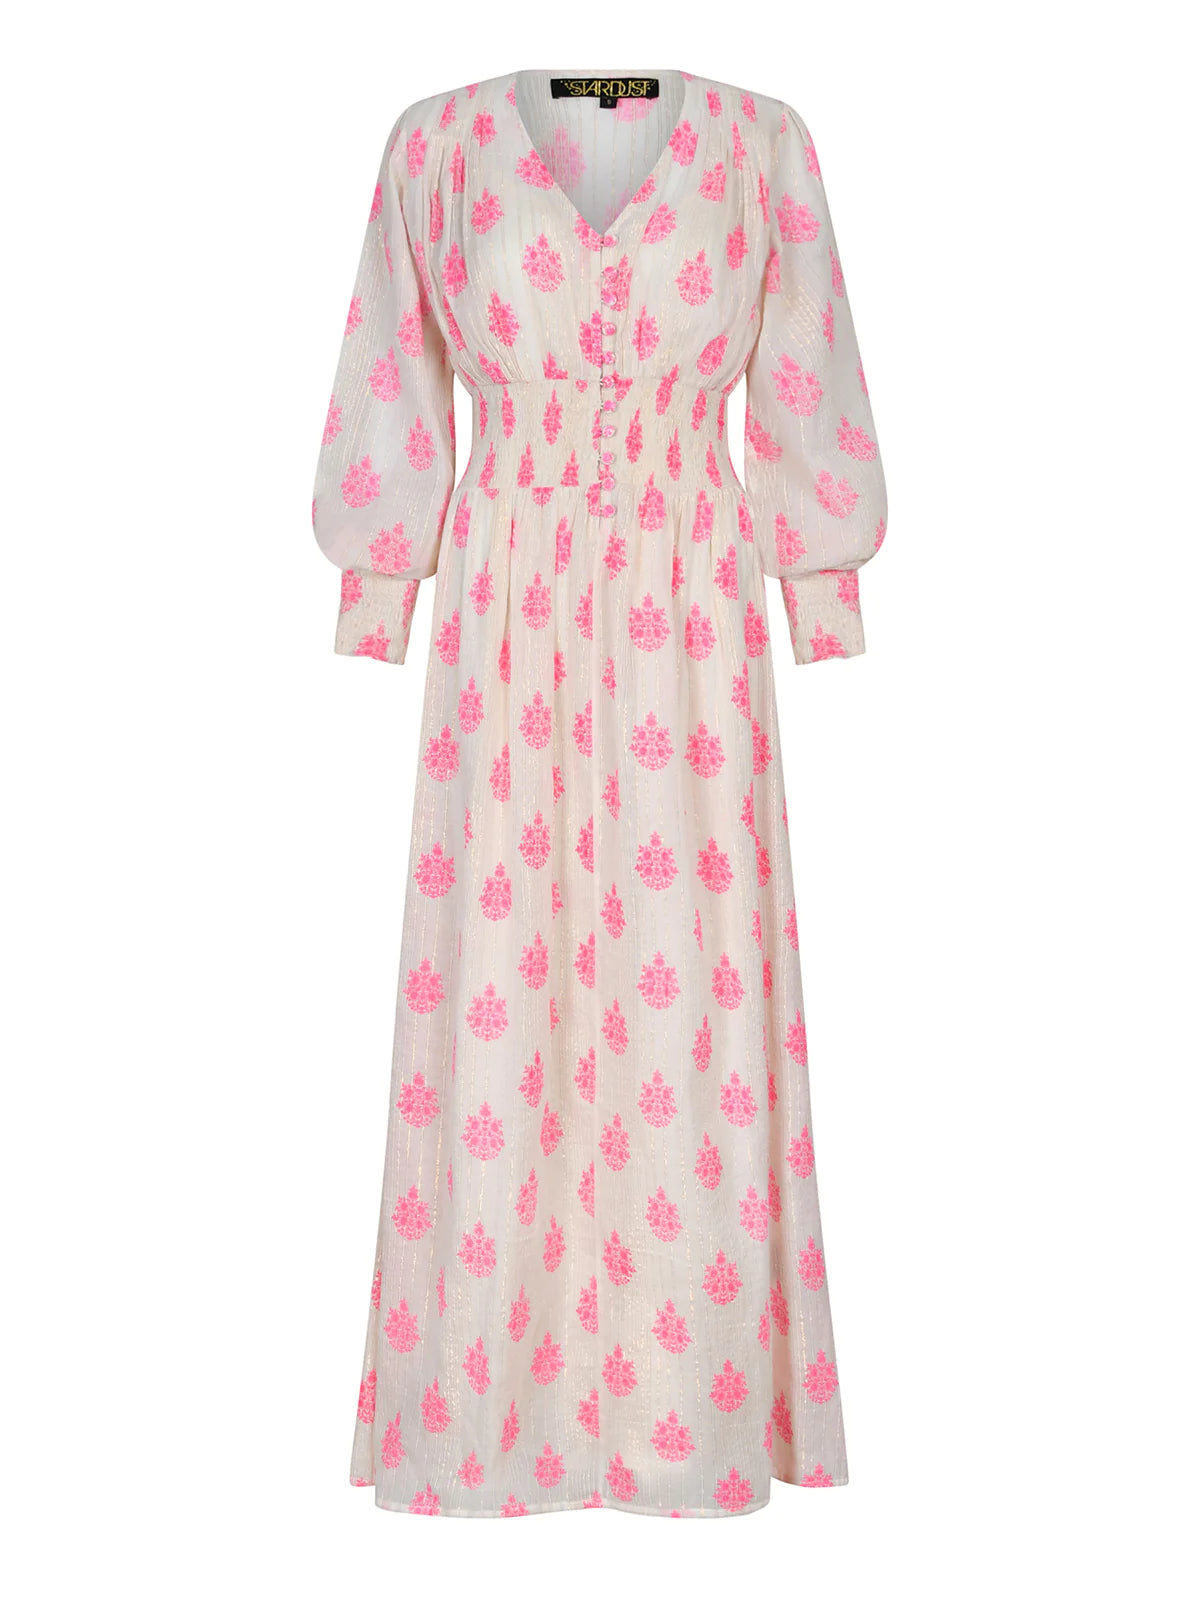 ecru and neon pink print maxi dress with long sleeves and V neck with shirred waist